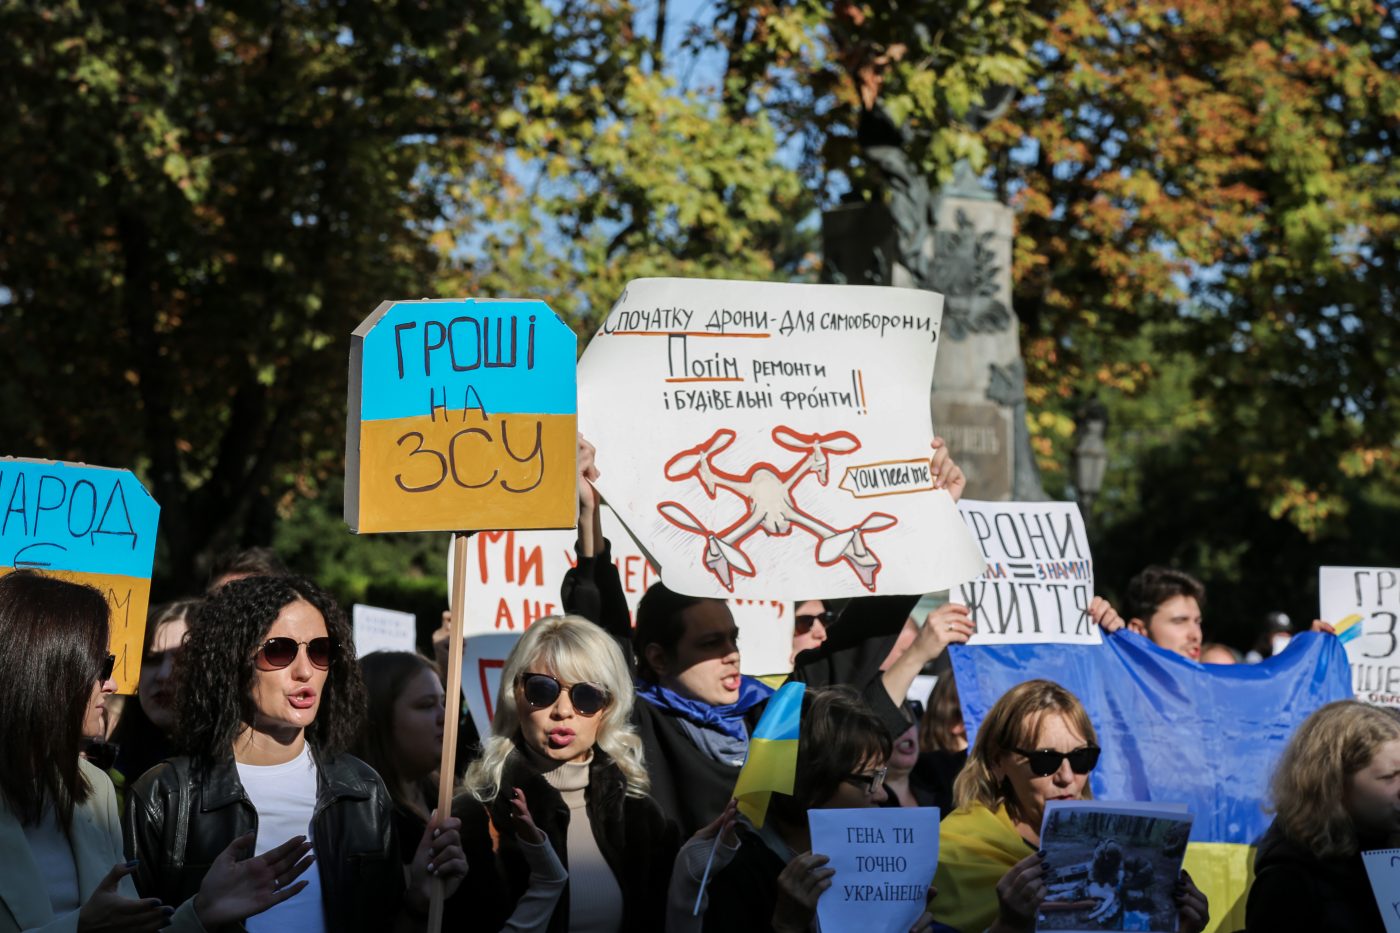 Photo: Protesters hold signs expressing their opinions near the City Hall building during the demonstration. For more than a month in Odessa, rallies against the misuse of budget funds have been held near the City Hall building. According to those protesting, all budget funds should be allocated to the needs of the Armed Forces of Ukraine, and not to secondary needs such as repairing buildings or purchasing Christmas trees. Credit: Photo by Viacheslav Onyshchenko / SOPA Images/Sipa USA. No Use Germany.